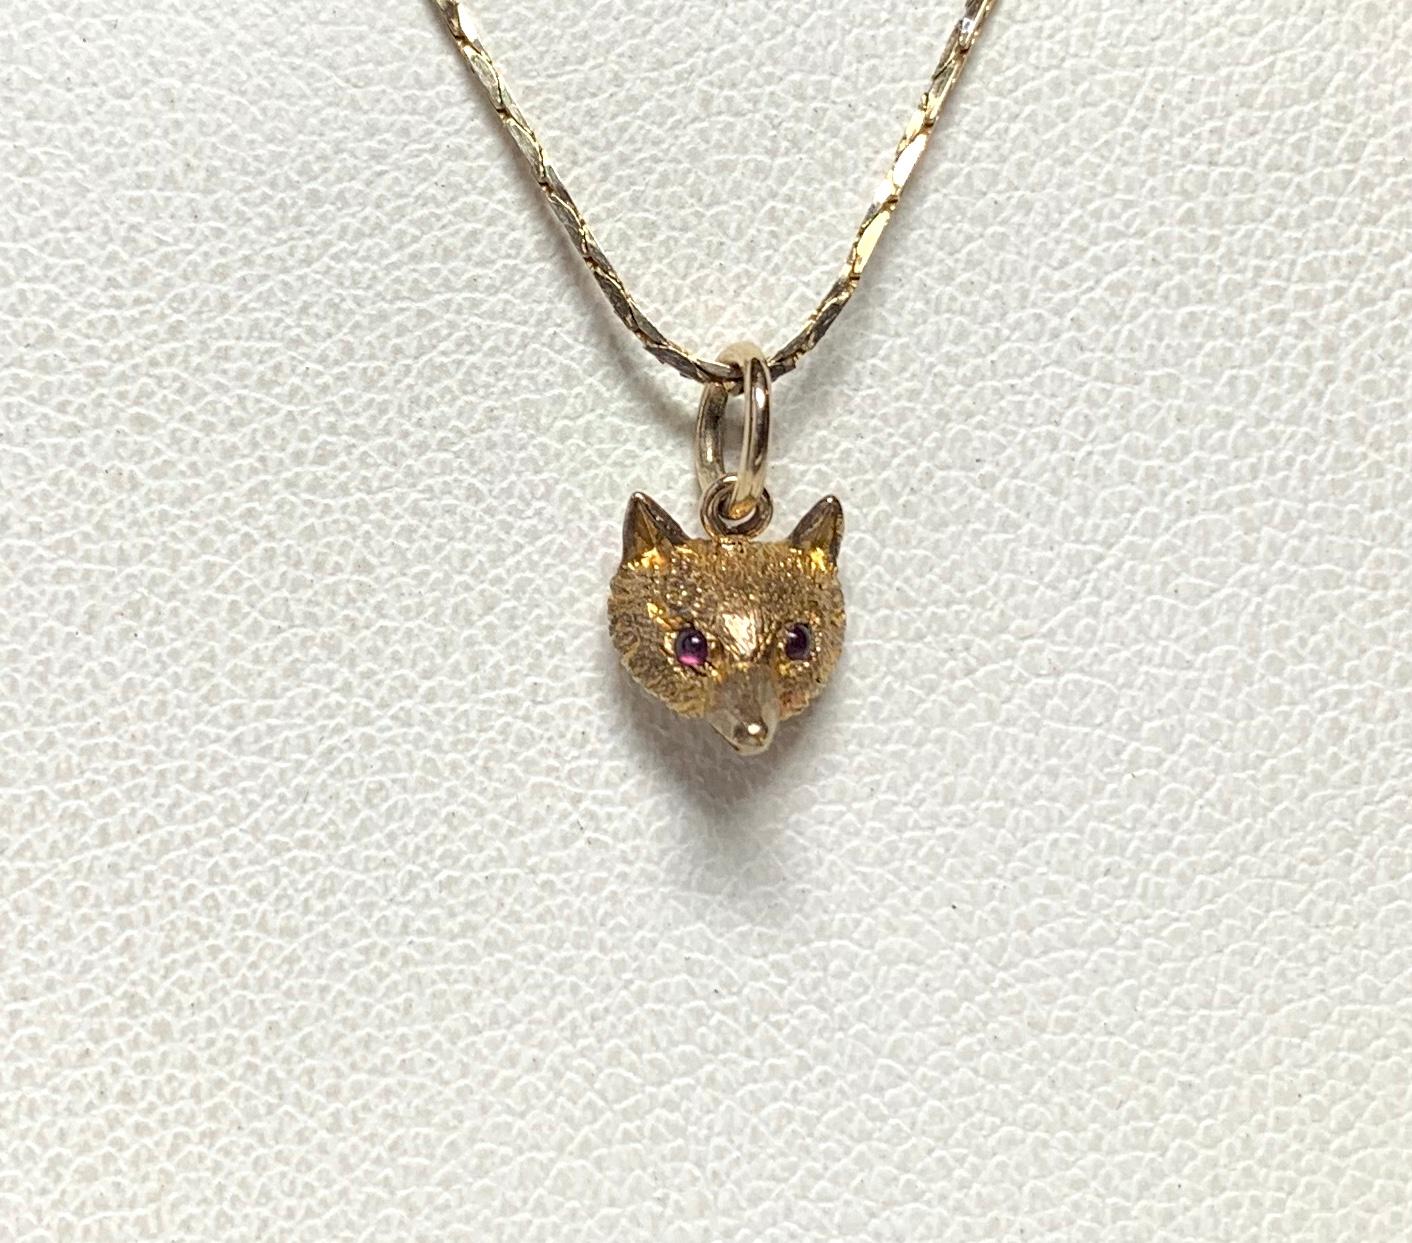 A wonderful antique Belle Epoque, Victorian pendant with a beautifully modeled Fox head in 9 Karat Gold with two Ruby eyes.  We love our antique animal jewelry and this one has such stunning design.   The engraved gold work creates a magnificent